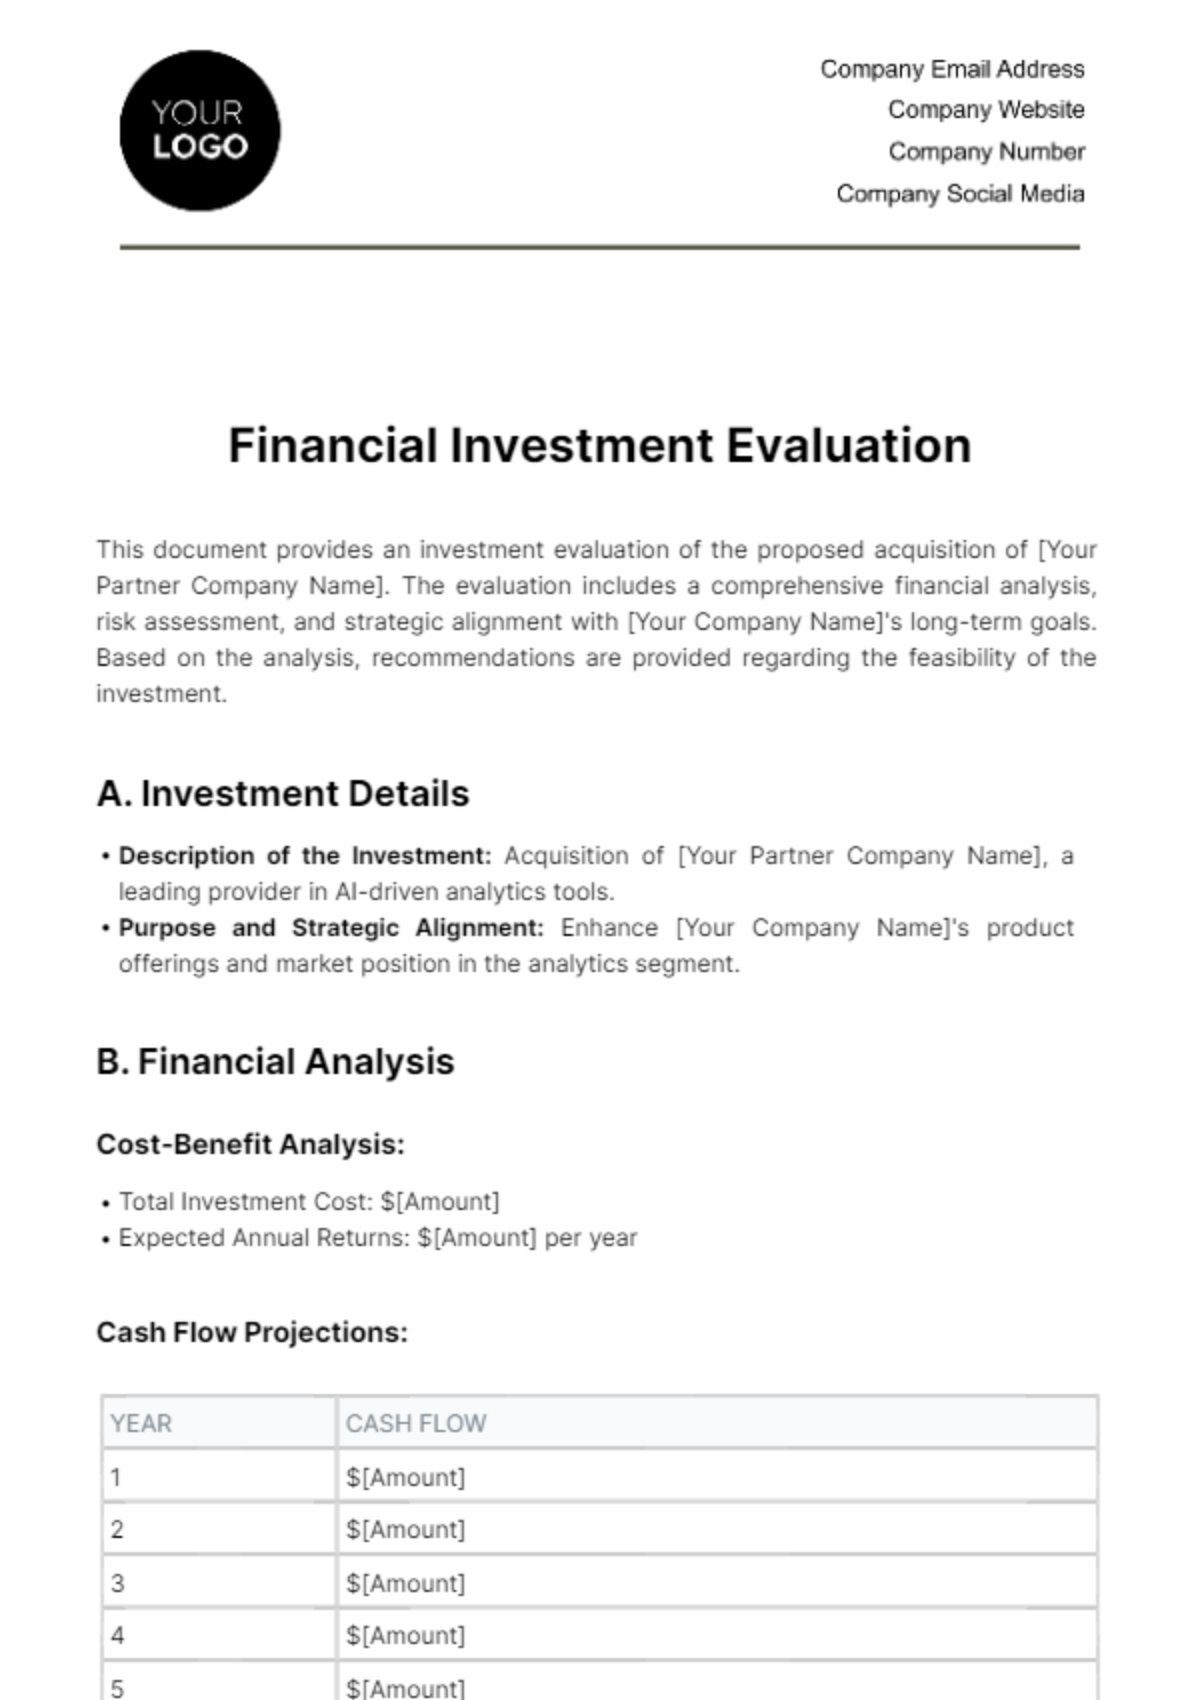 Free Financial Investment Evaluation Template